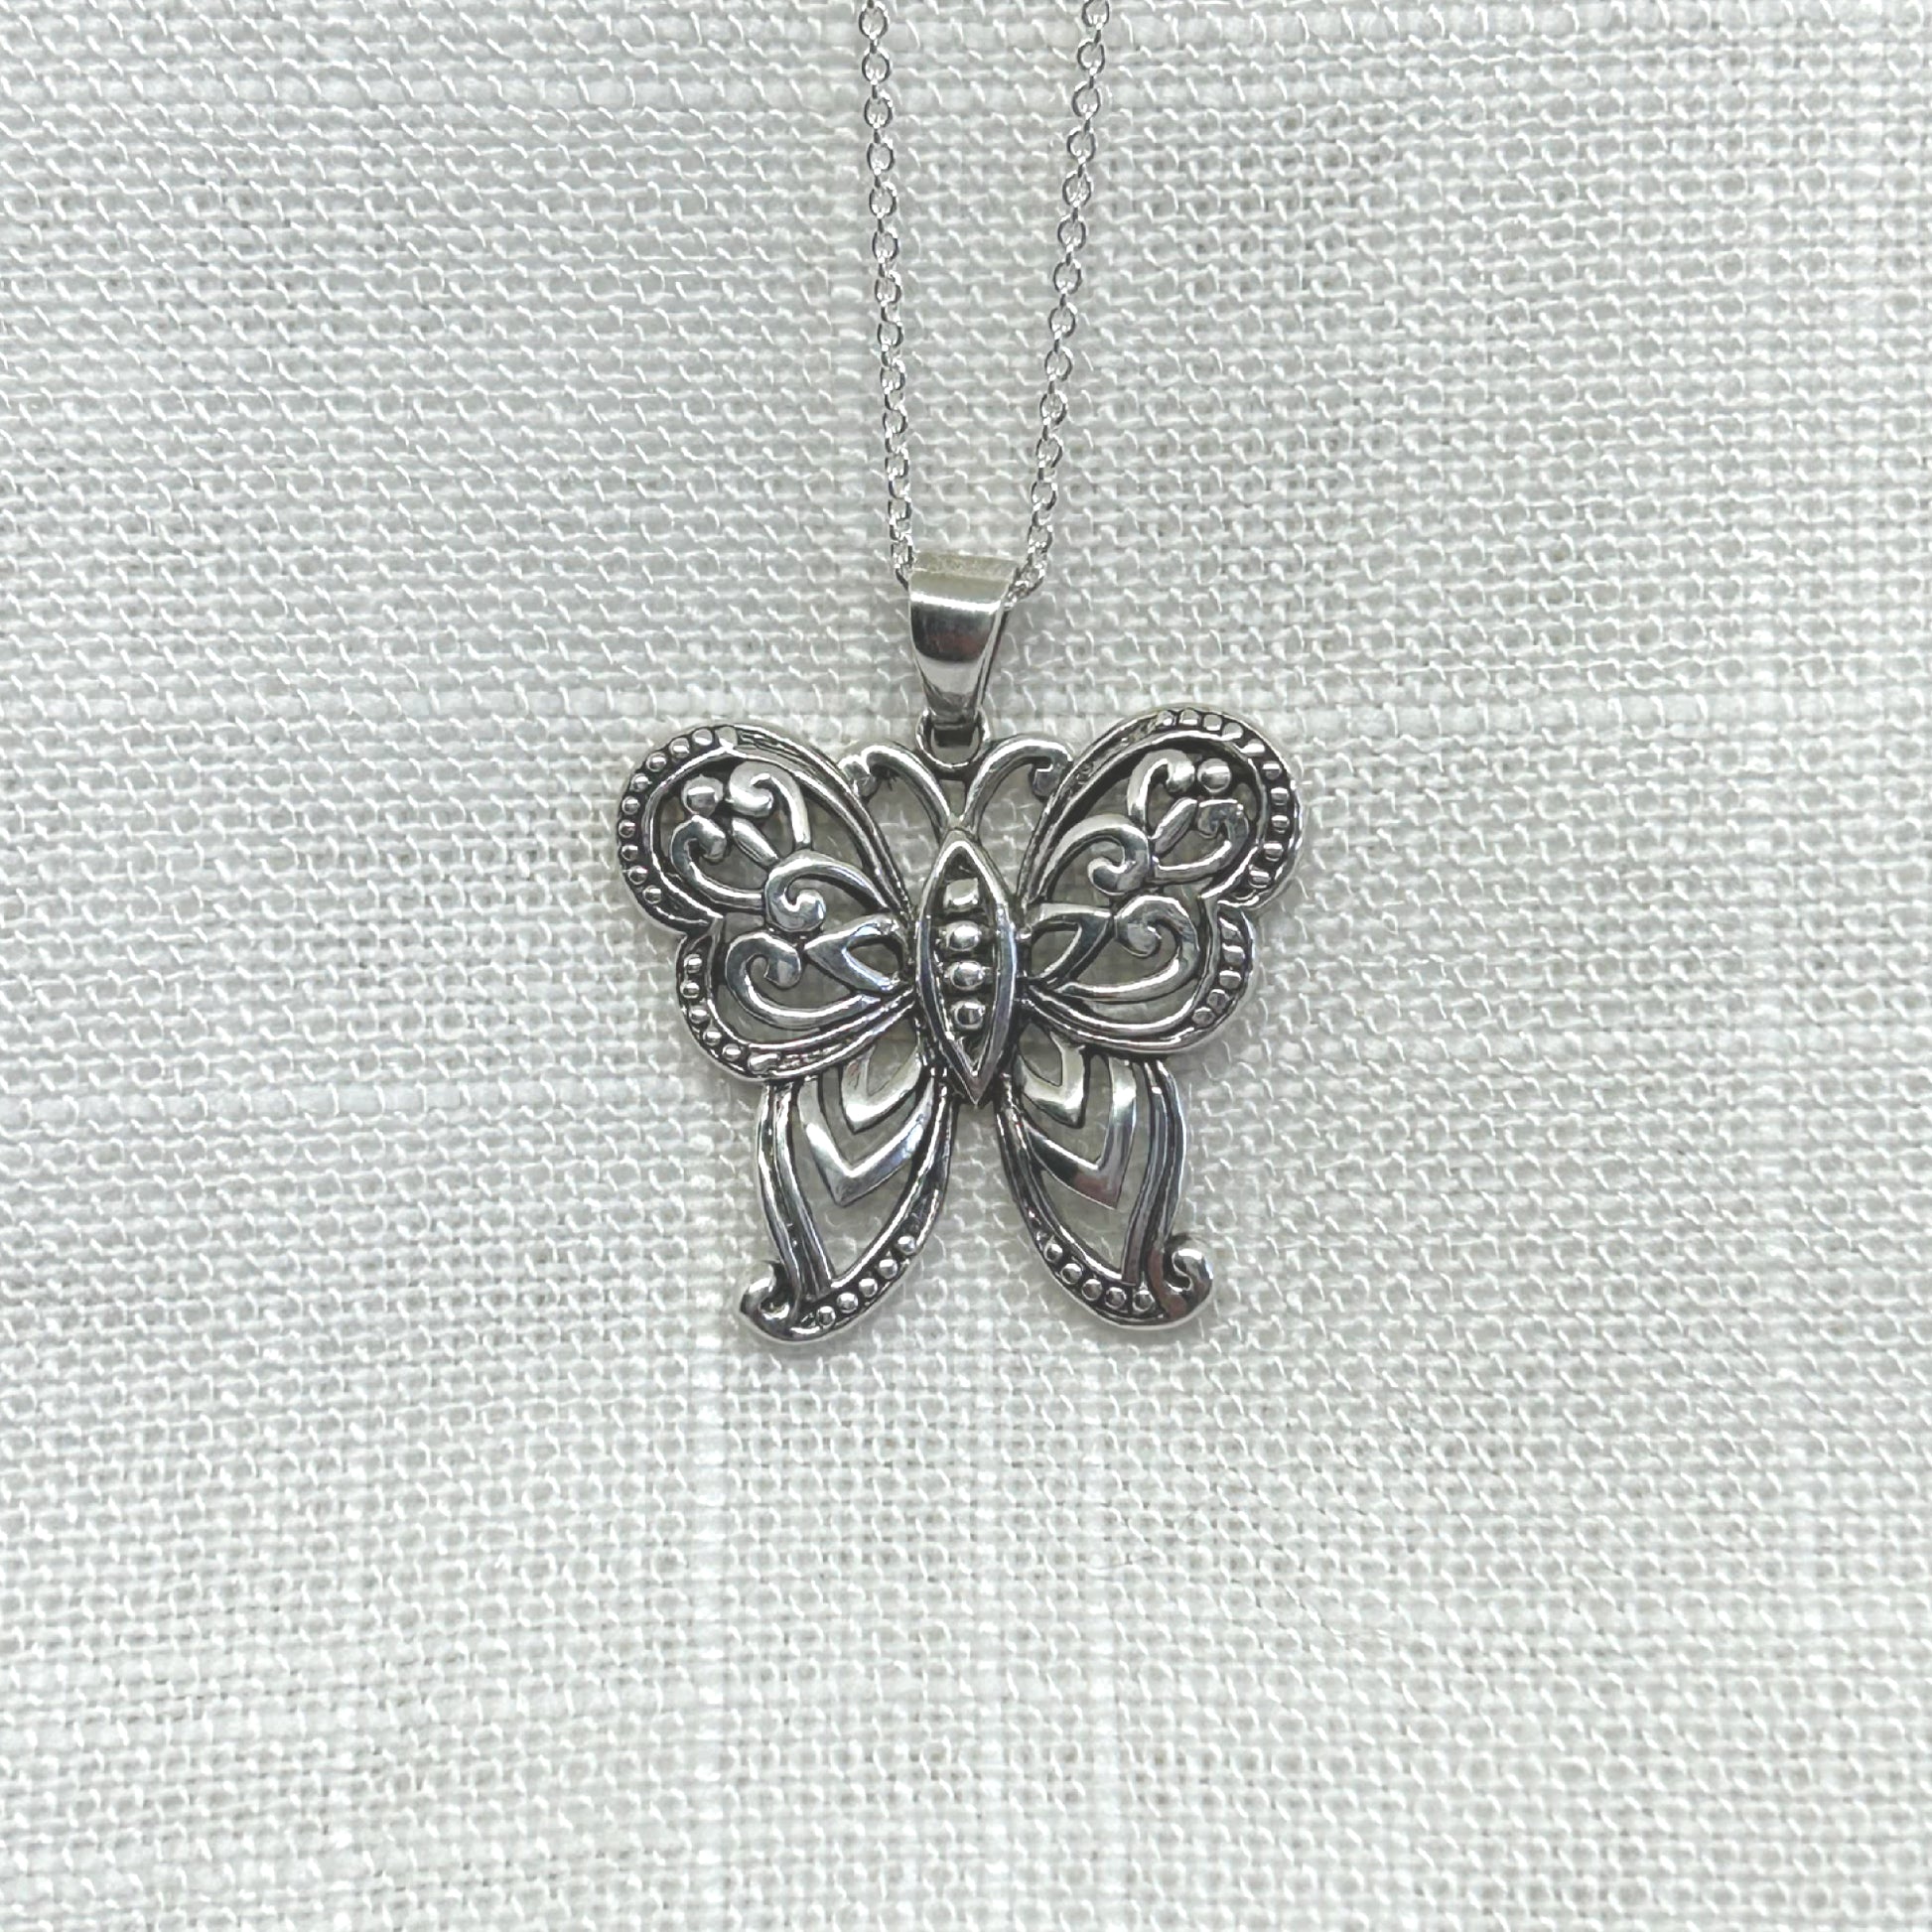 This beautiful butterfly pendant is handmade in 925 silver with slight oxidisation to show off its full potential.  Measuring approximately 2.75cm long including the bale by 2.5cm at its widest point.   This pendant comes complete on a 20 inch 925 silver chain and will arrive in a tarnish proof bag inside a gift box.